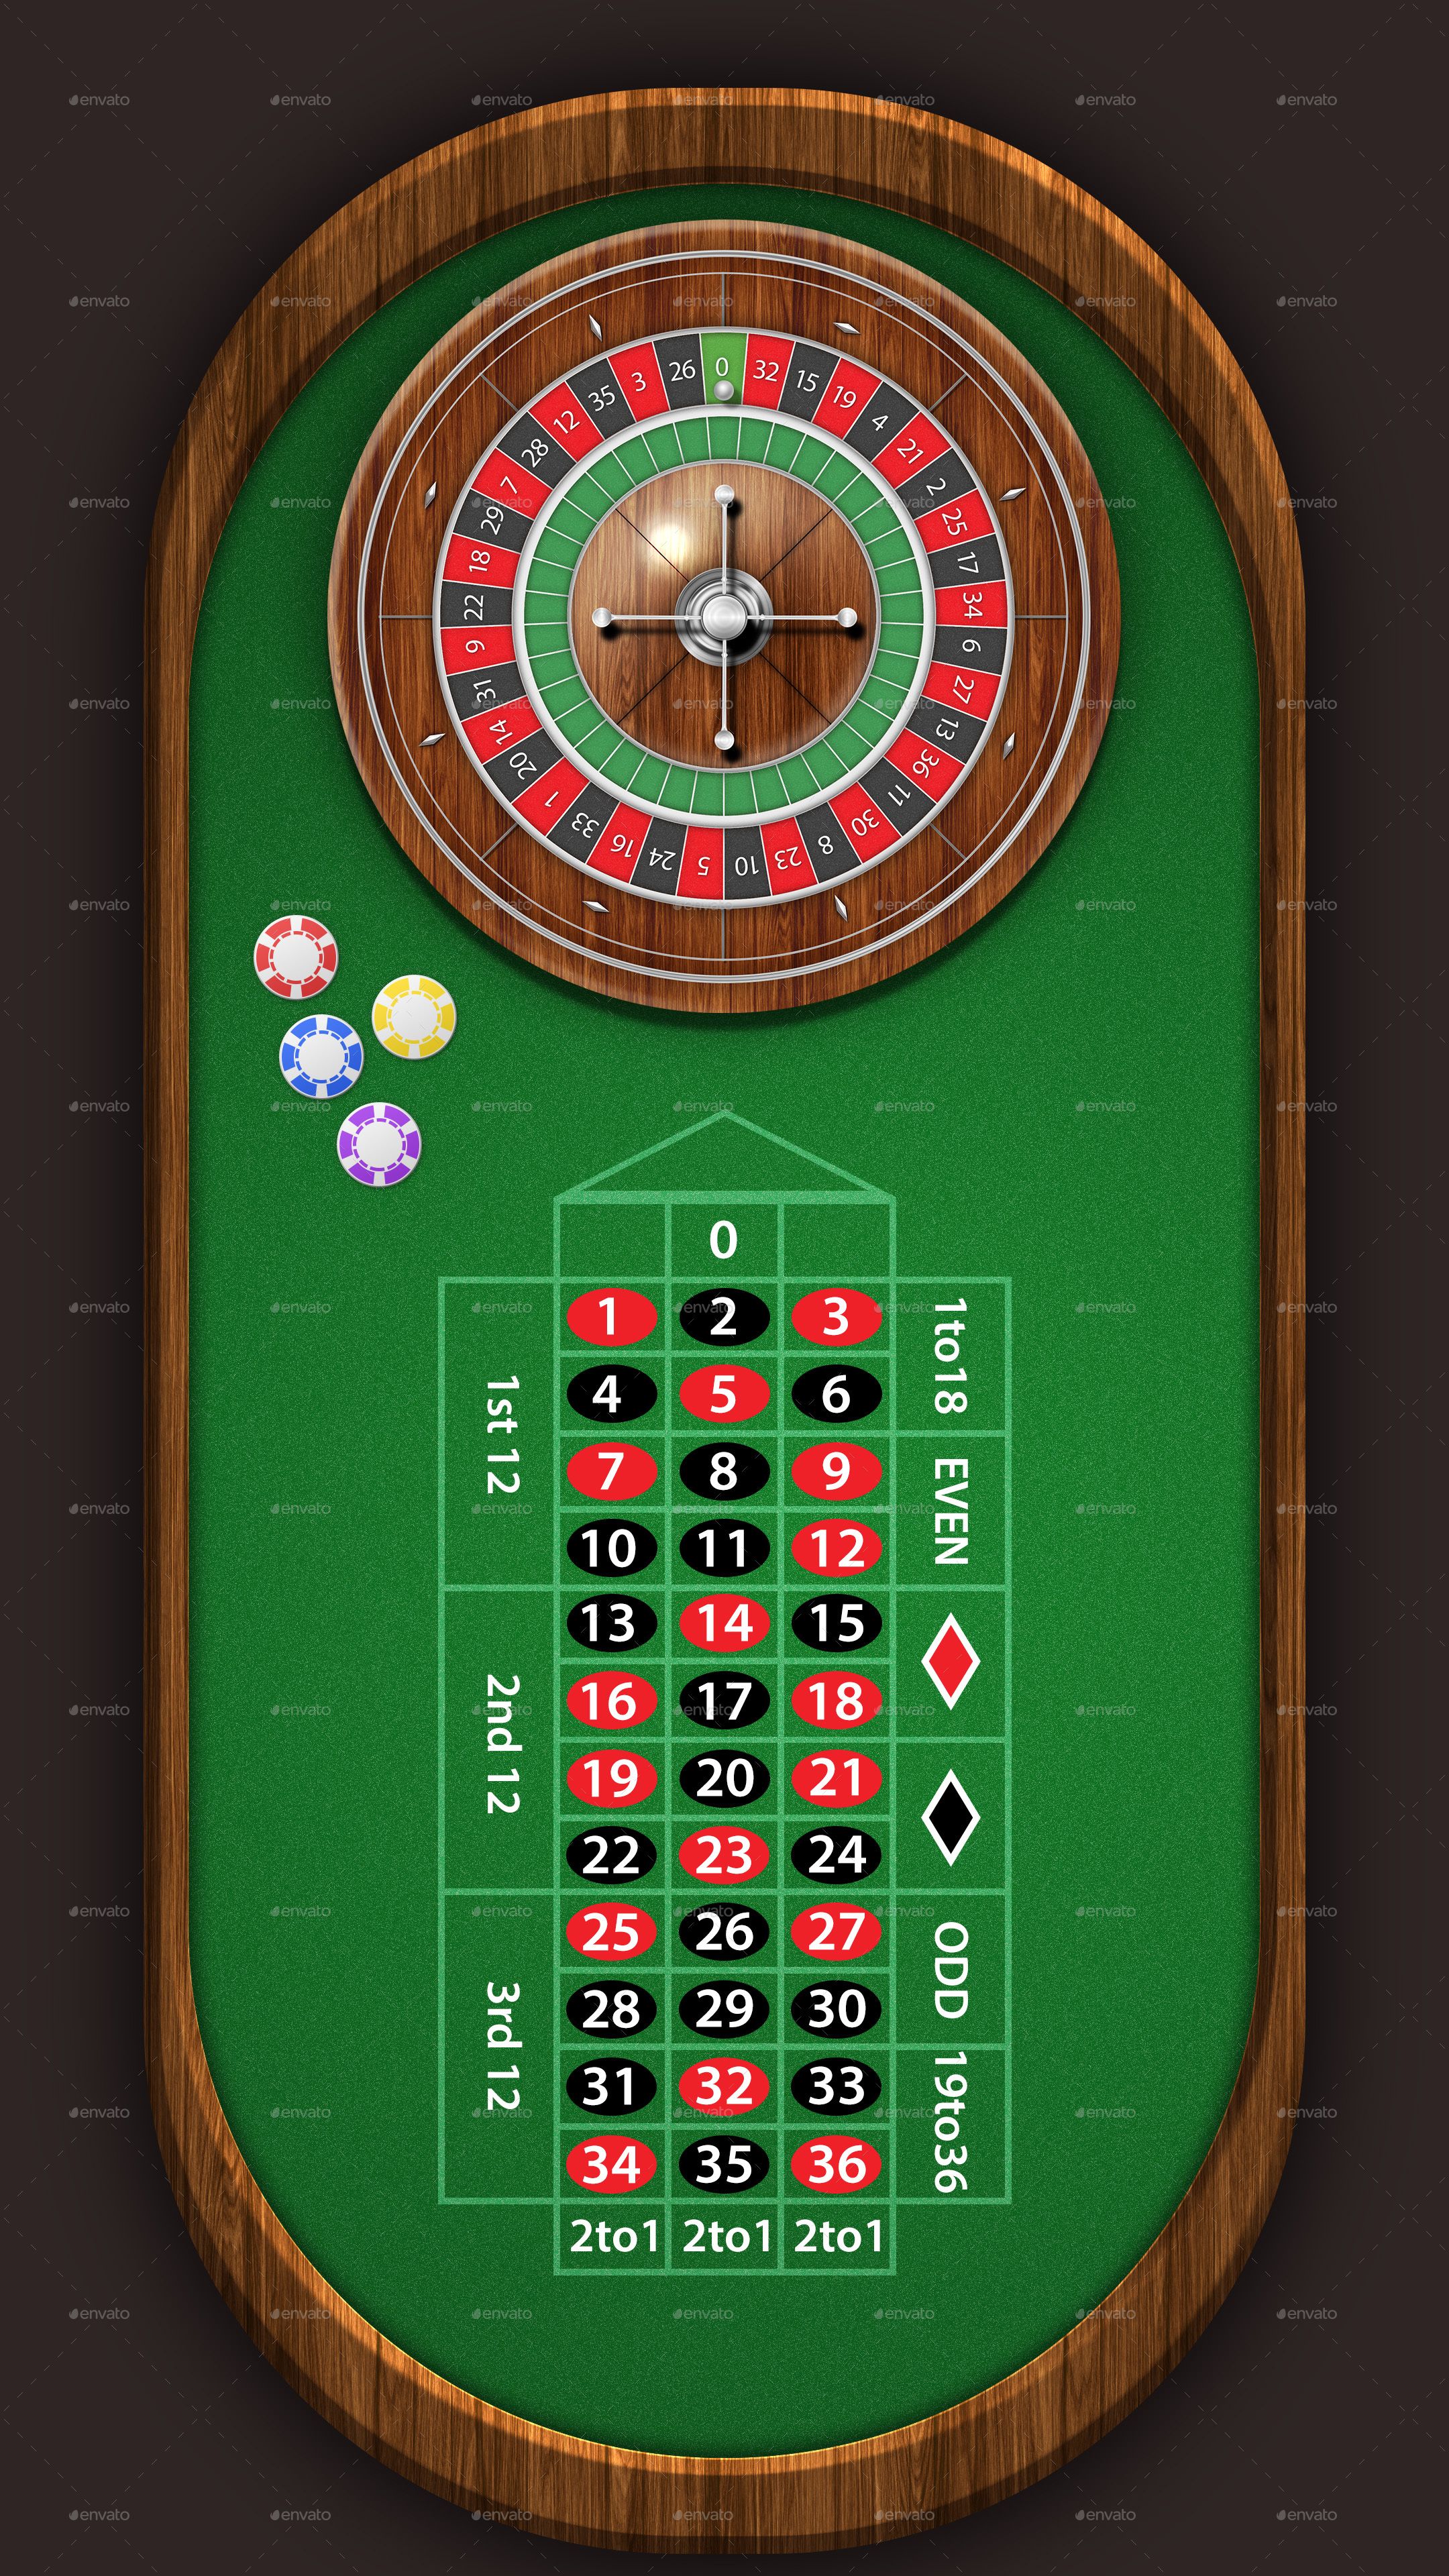 Picture Of A Roulette Table